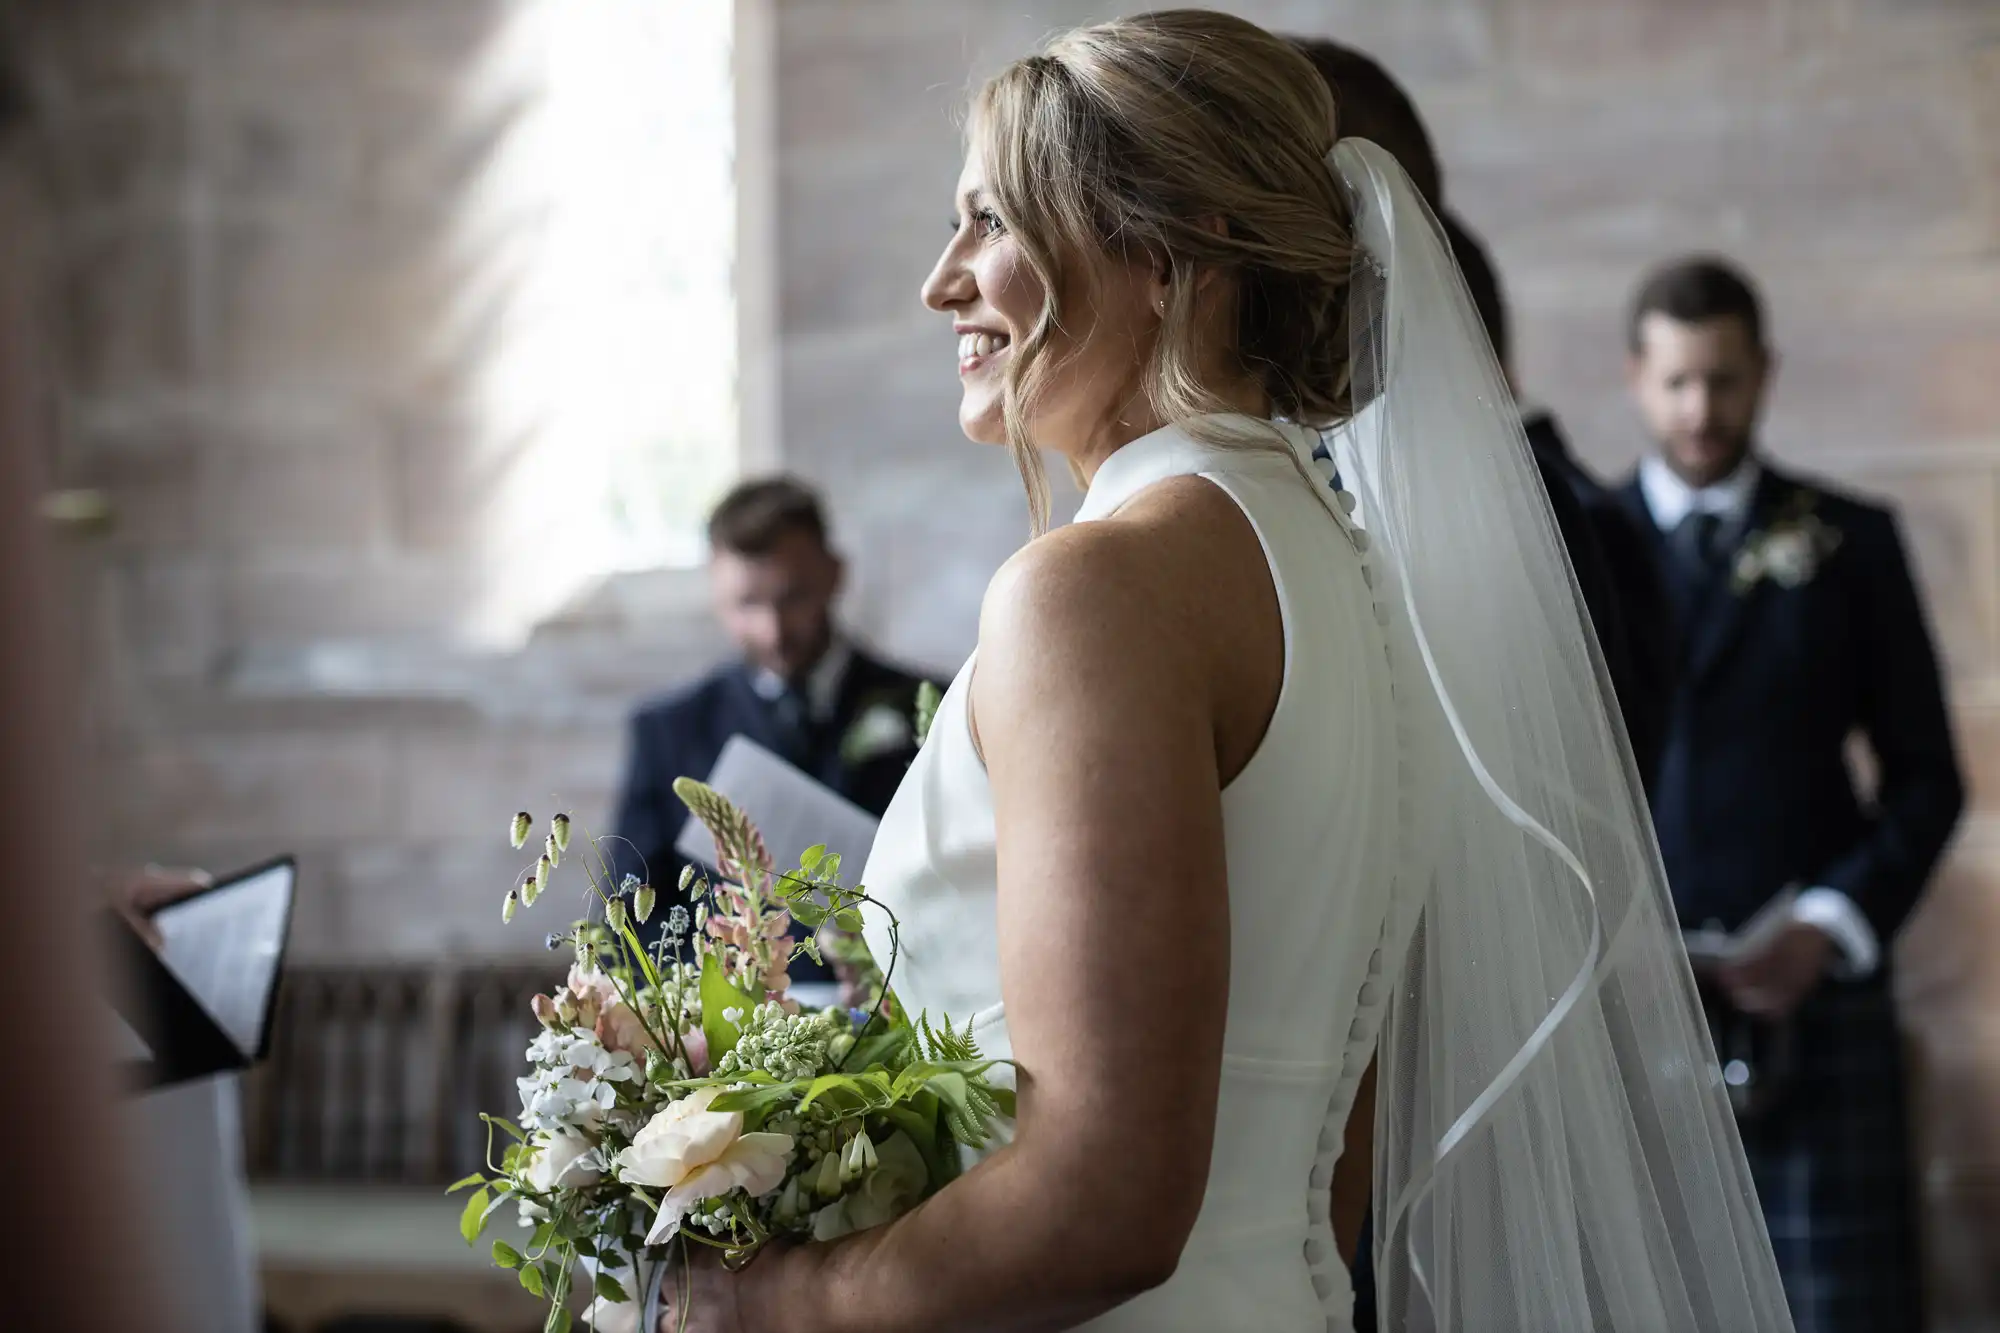 A bride holding a bouquet smiles during a wedding ceremony, with the groom looking on in the background in a church.